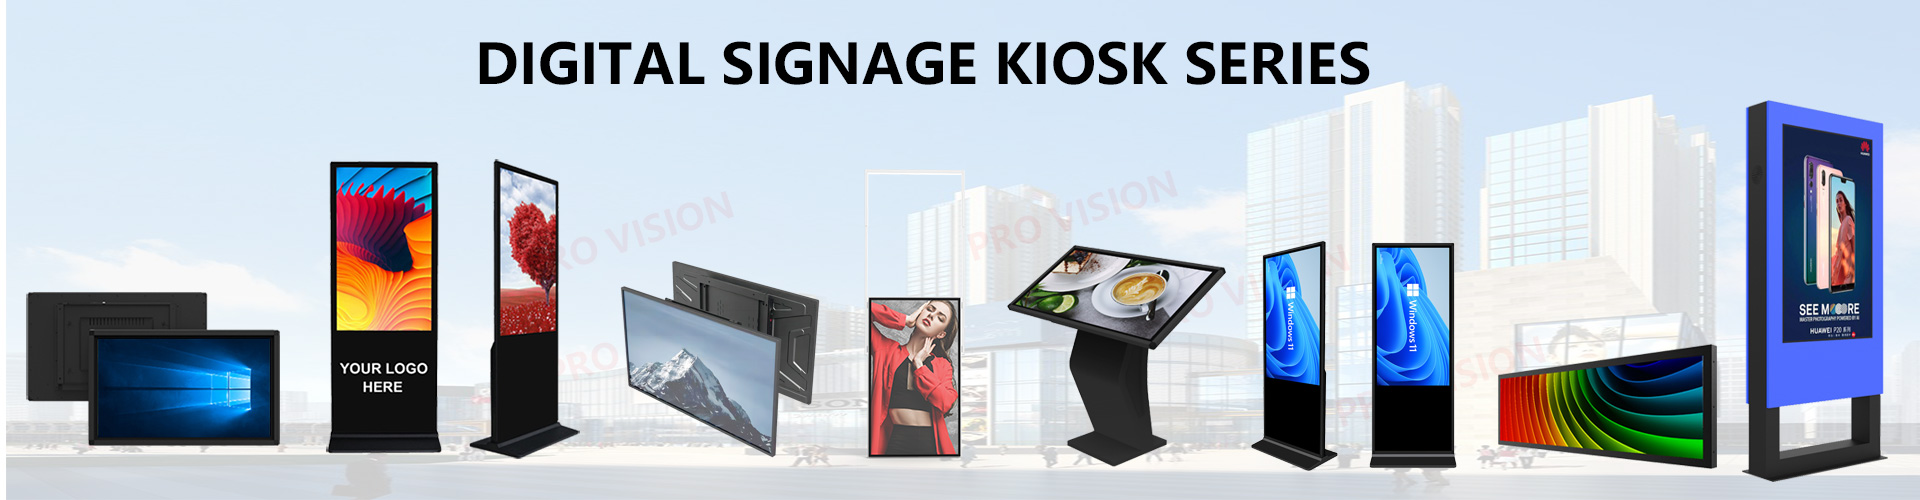 21.5 Inch Android Touch Screen Kiosk